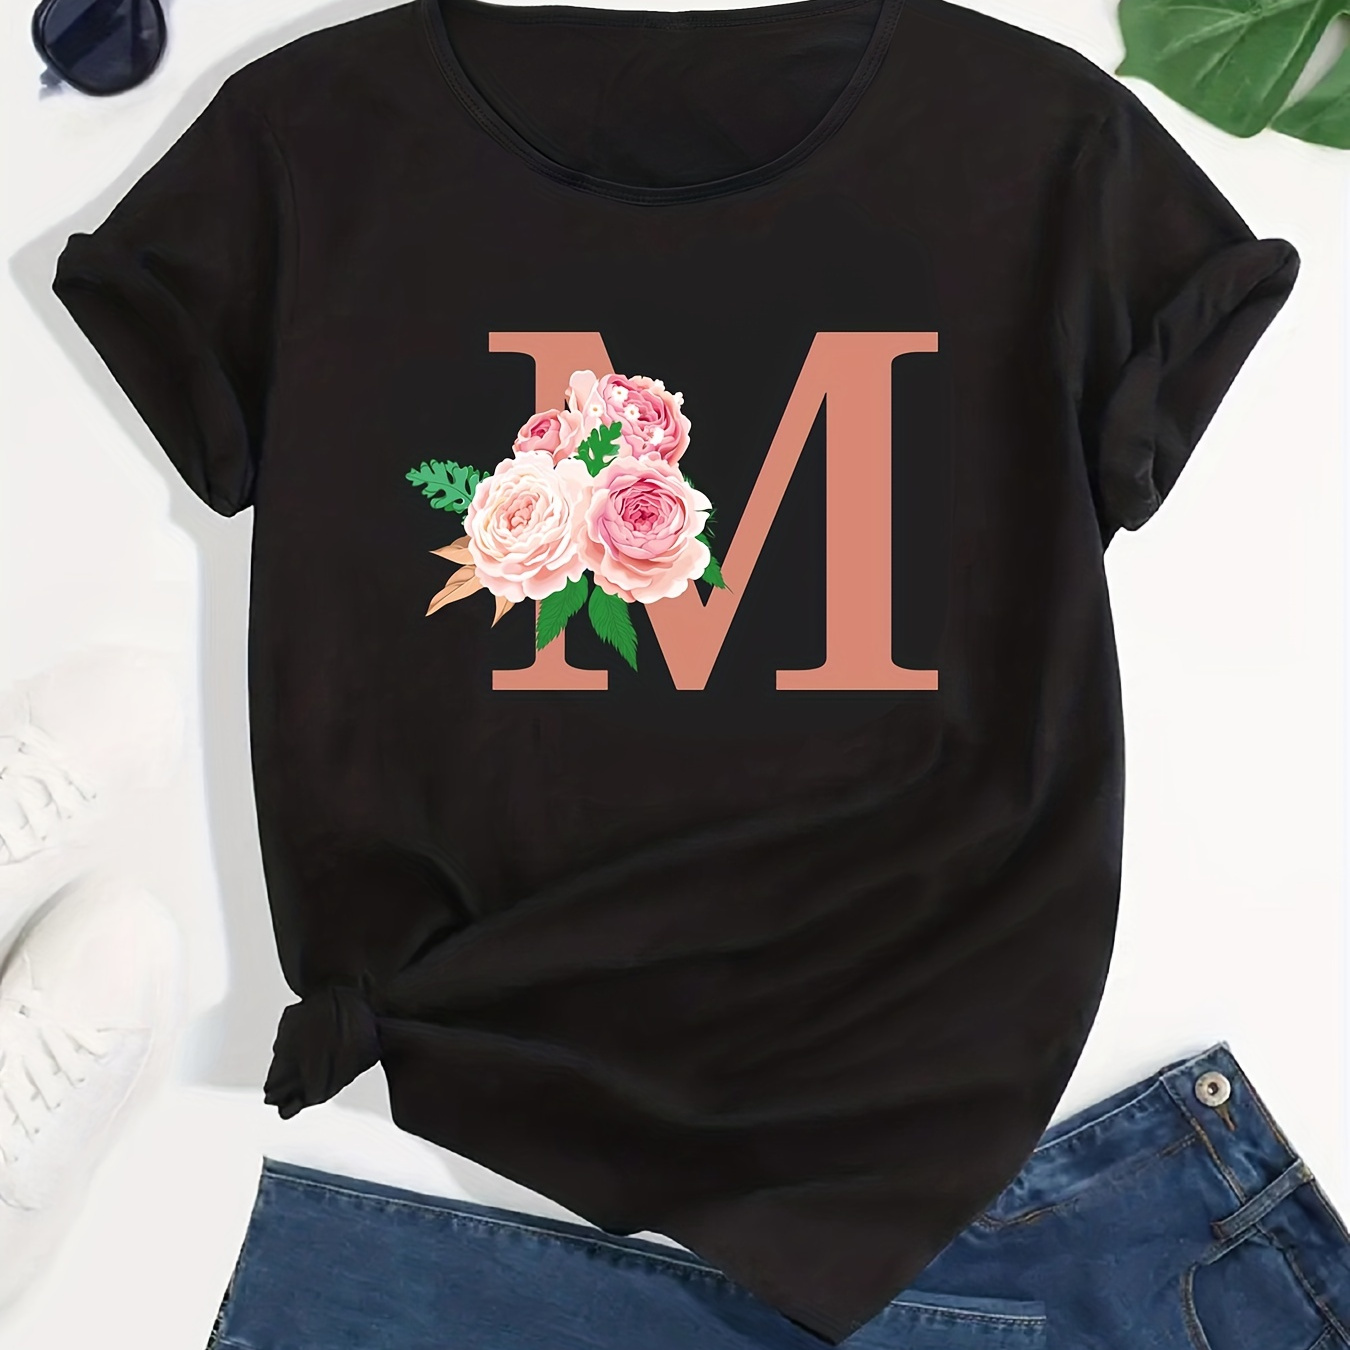 

Flower & "m" Letter Graphic Casual T-shirt, Round Neck Short Sleeves Soft Sporty Tee, Women's Clothing